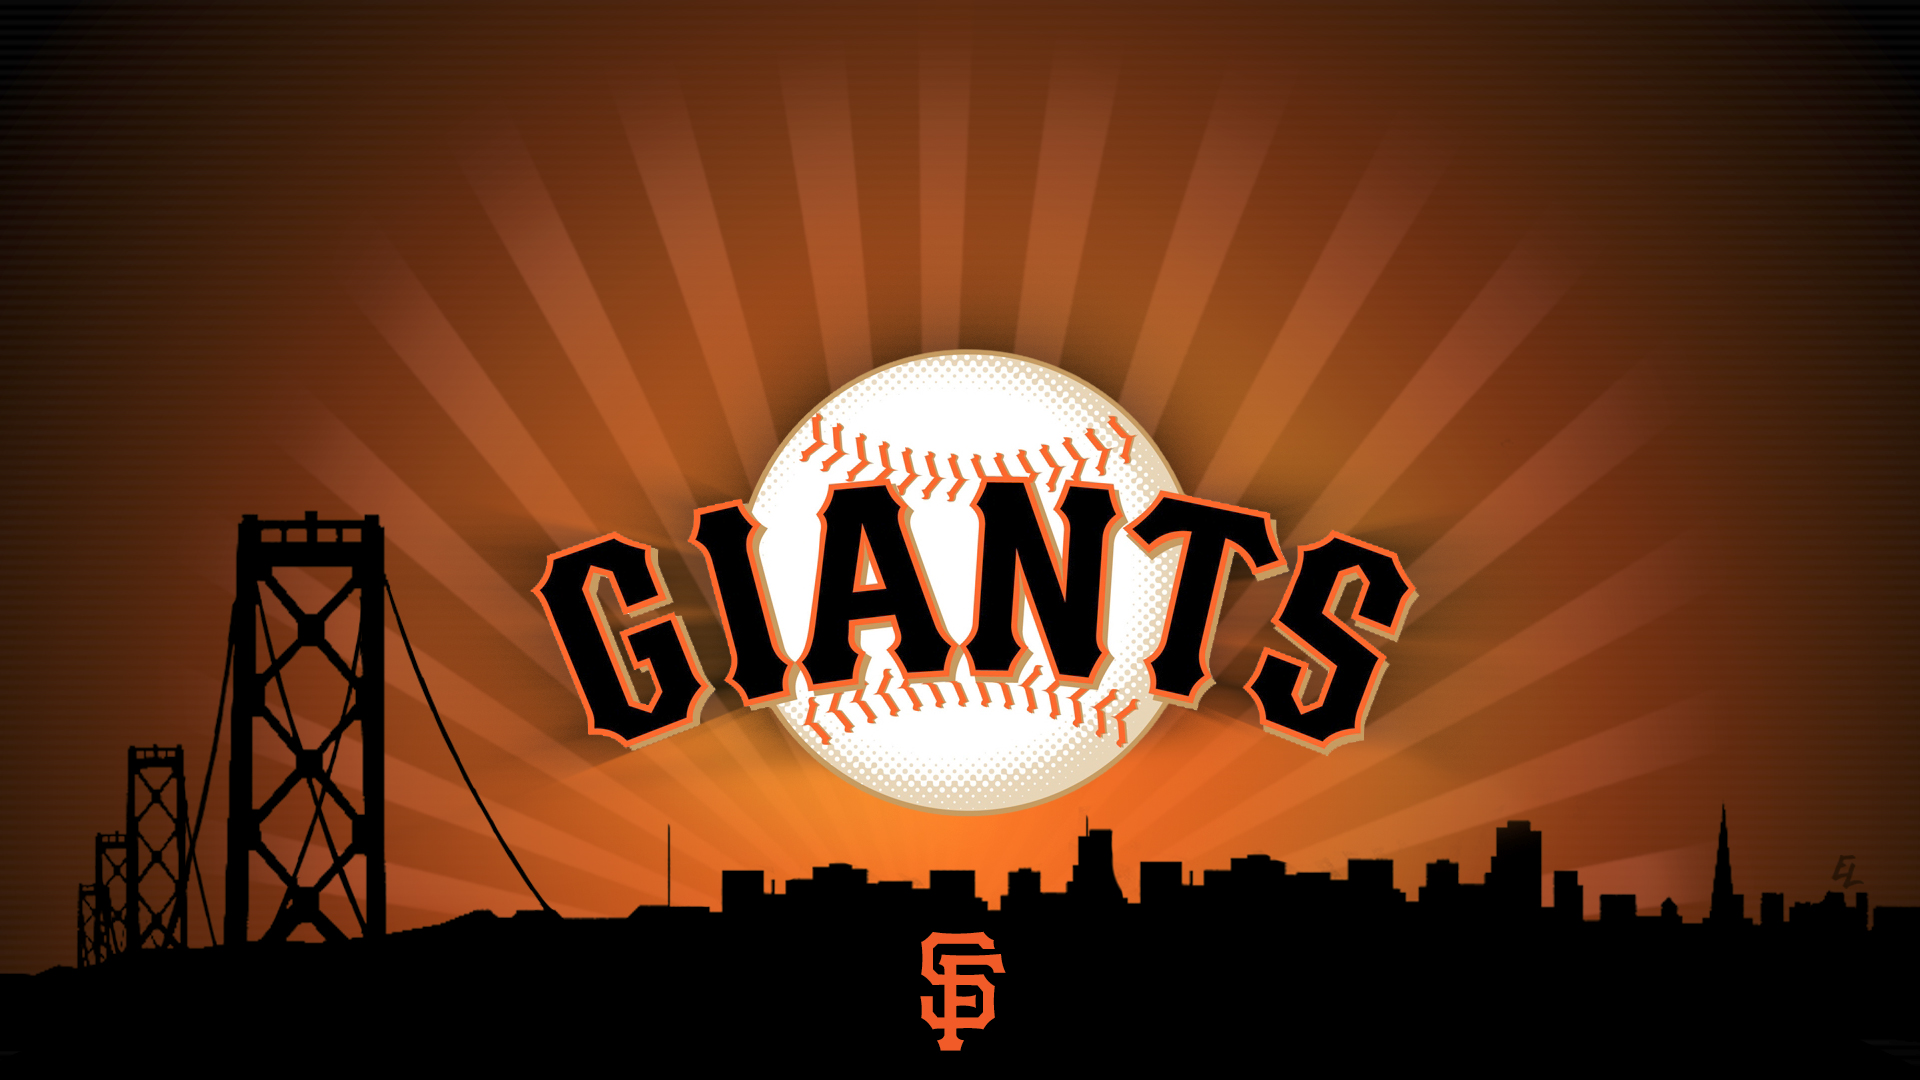 The San Francisco Giants face of against their long time rivals the 1920x1080